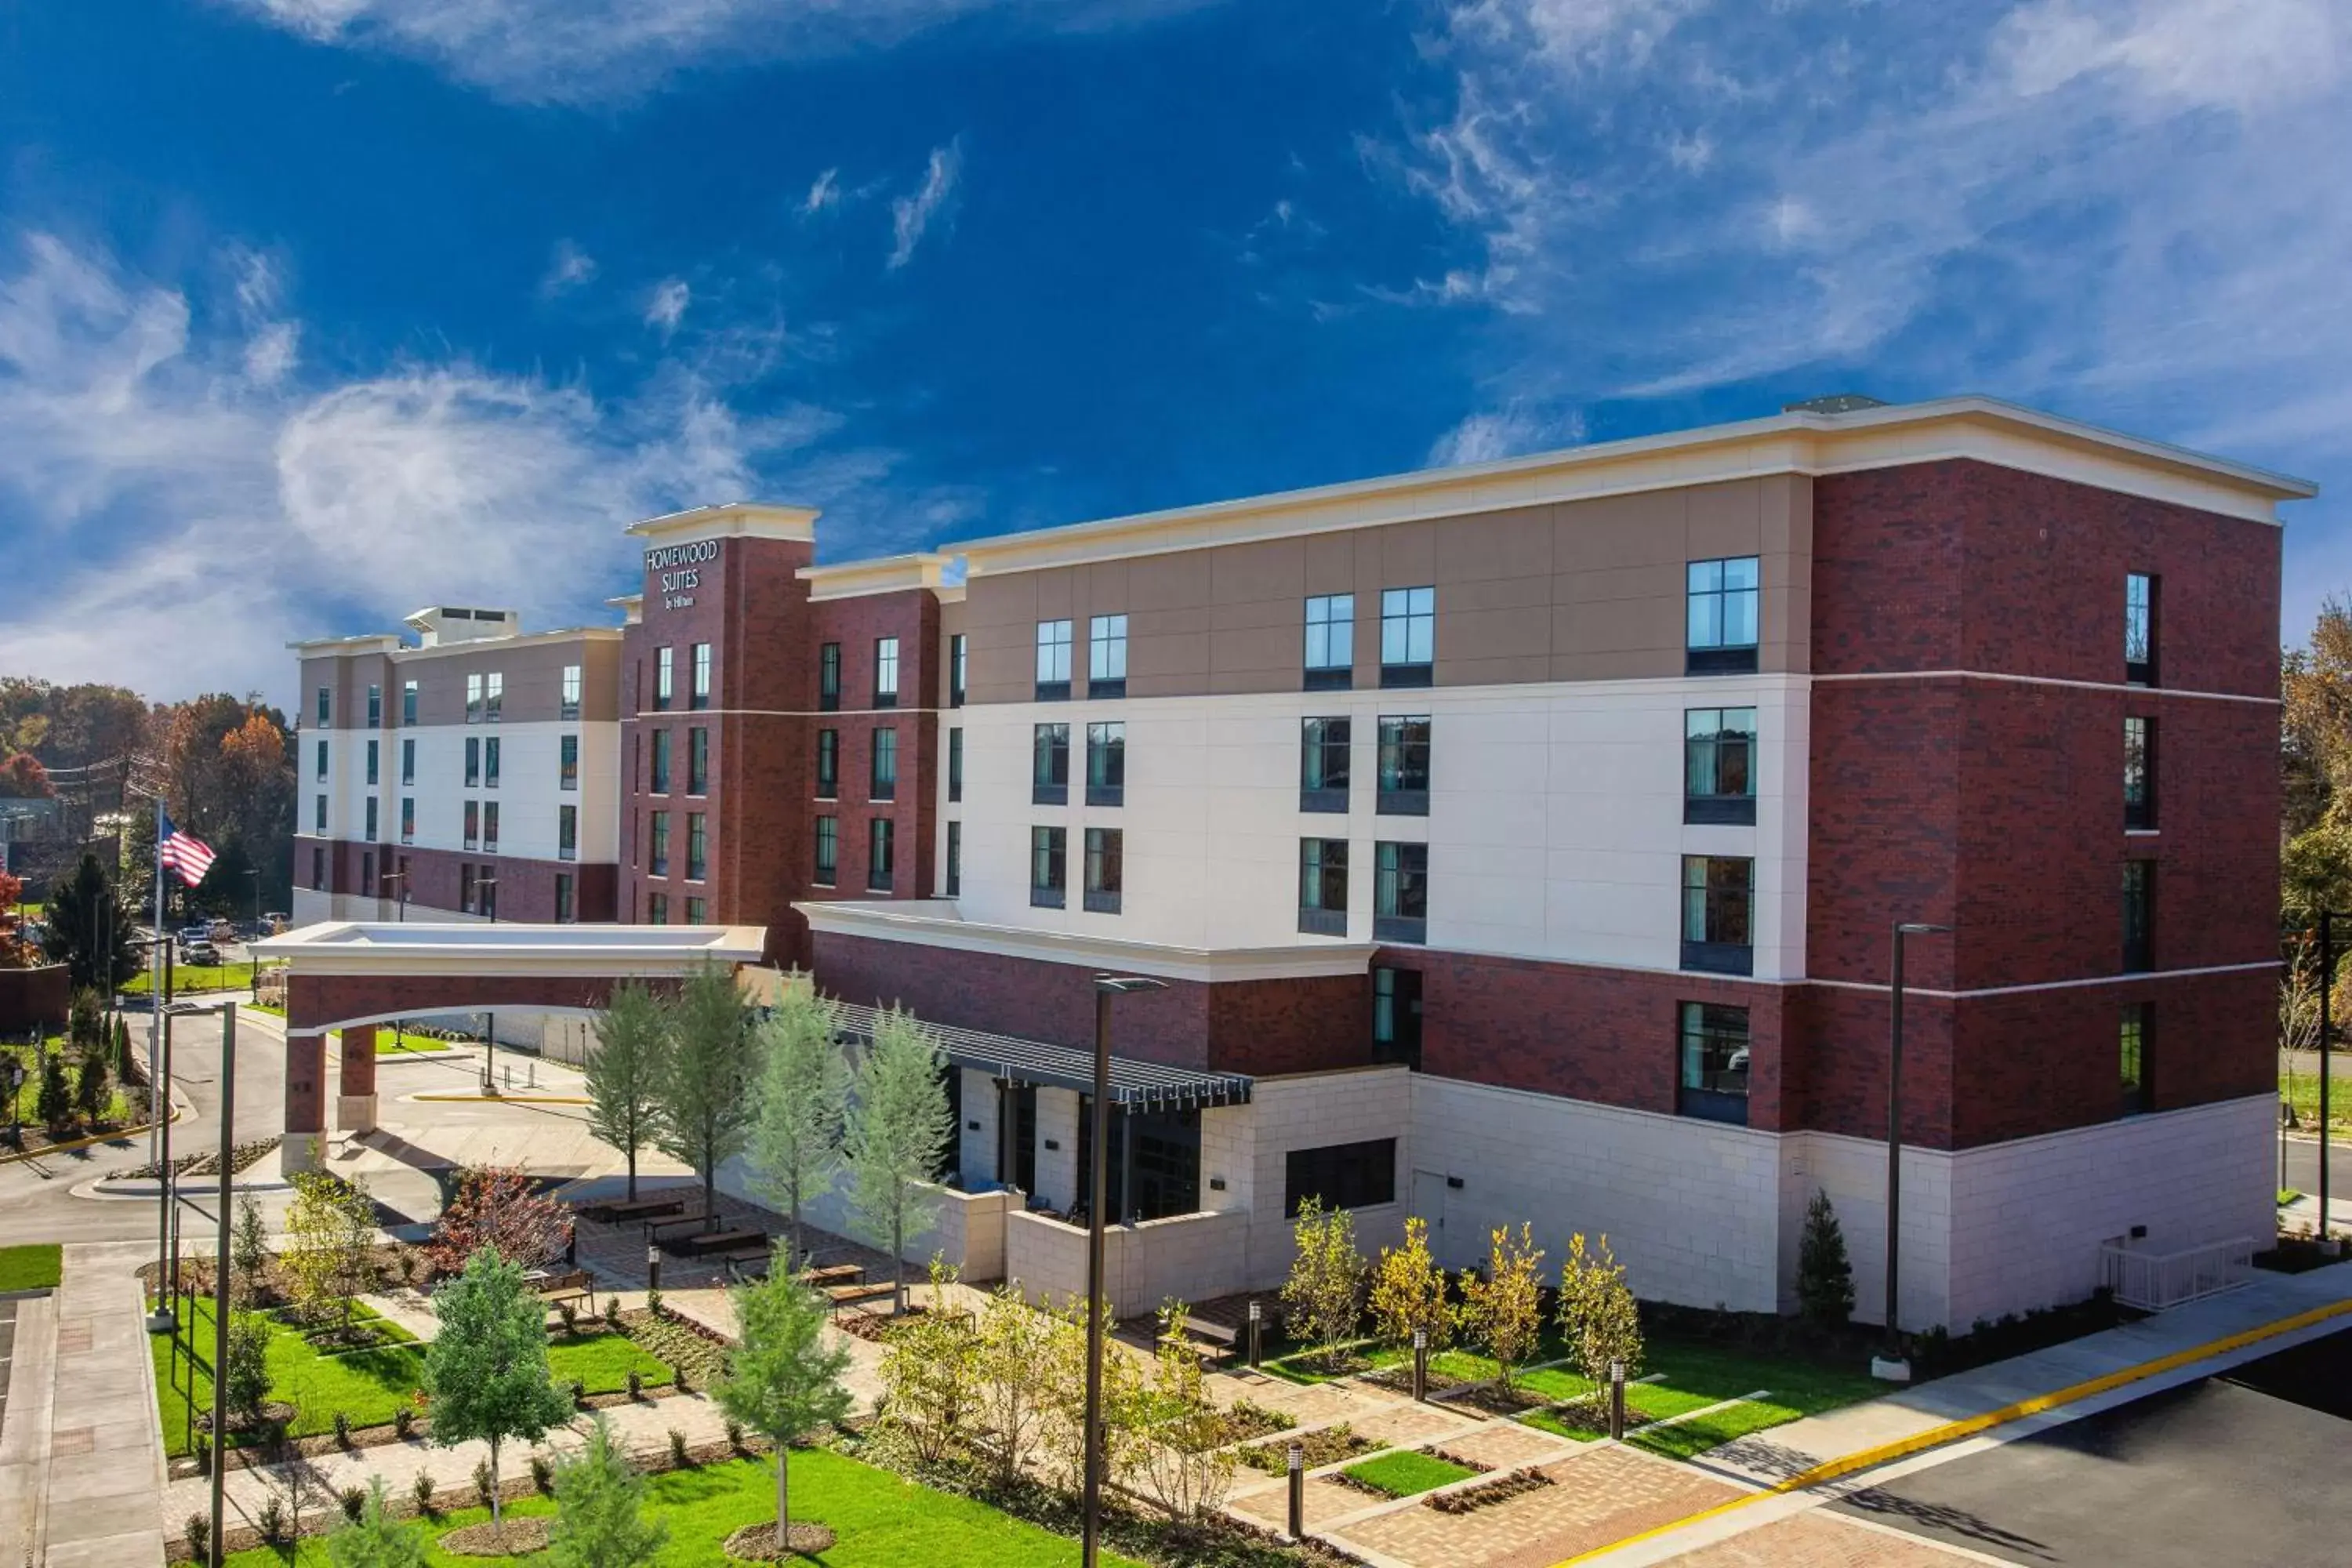 Property Building in Homewood Suites By Hilton Reston, VA